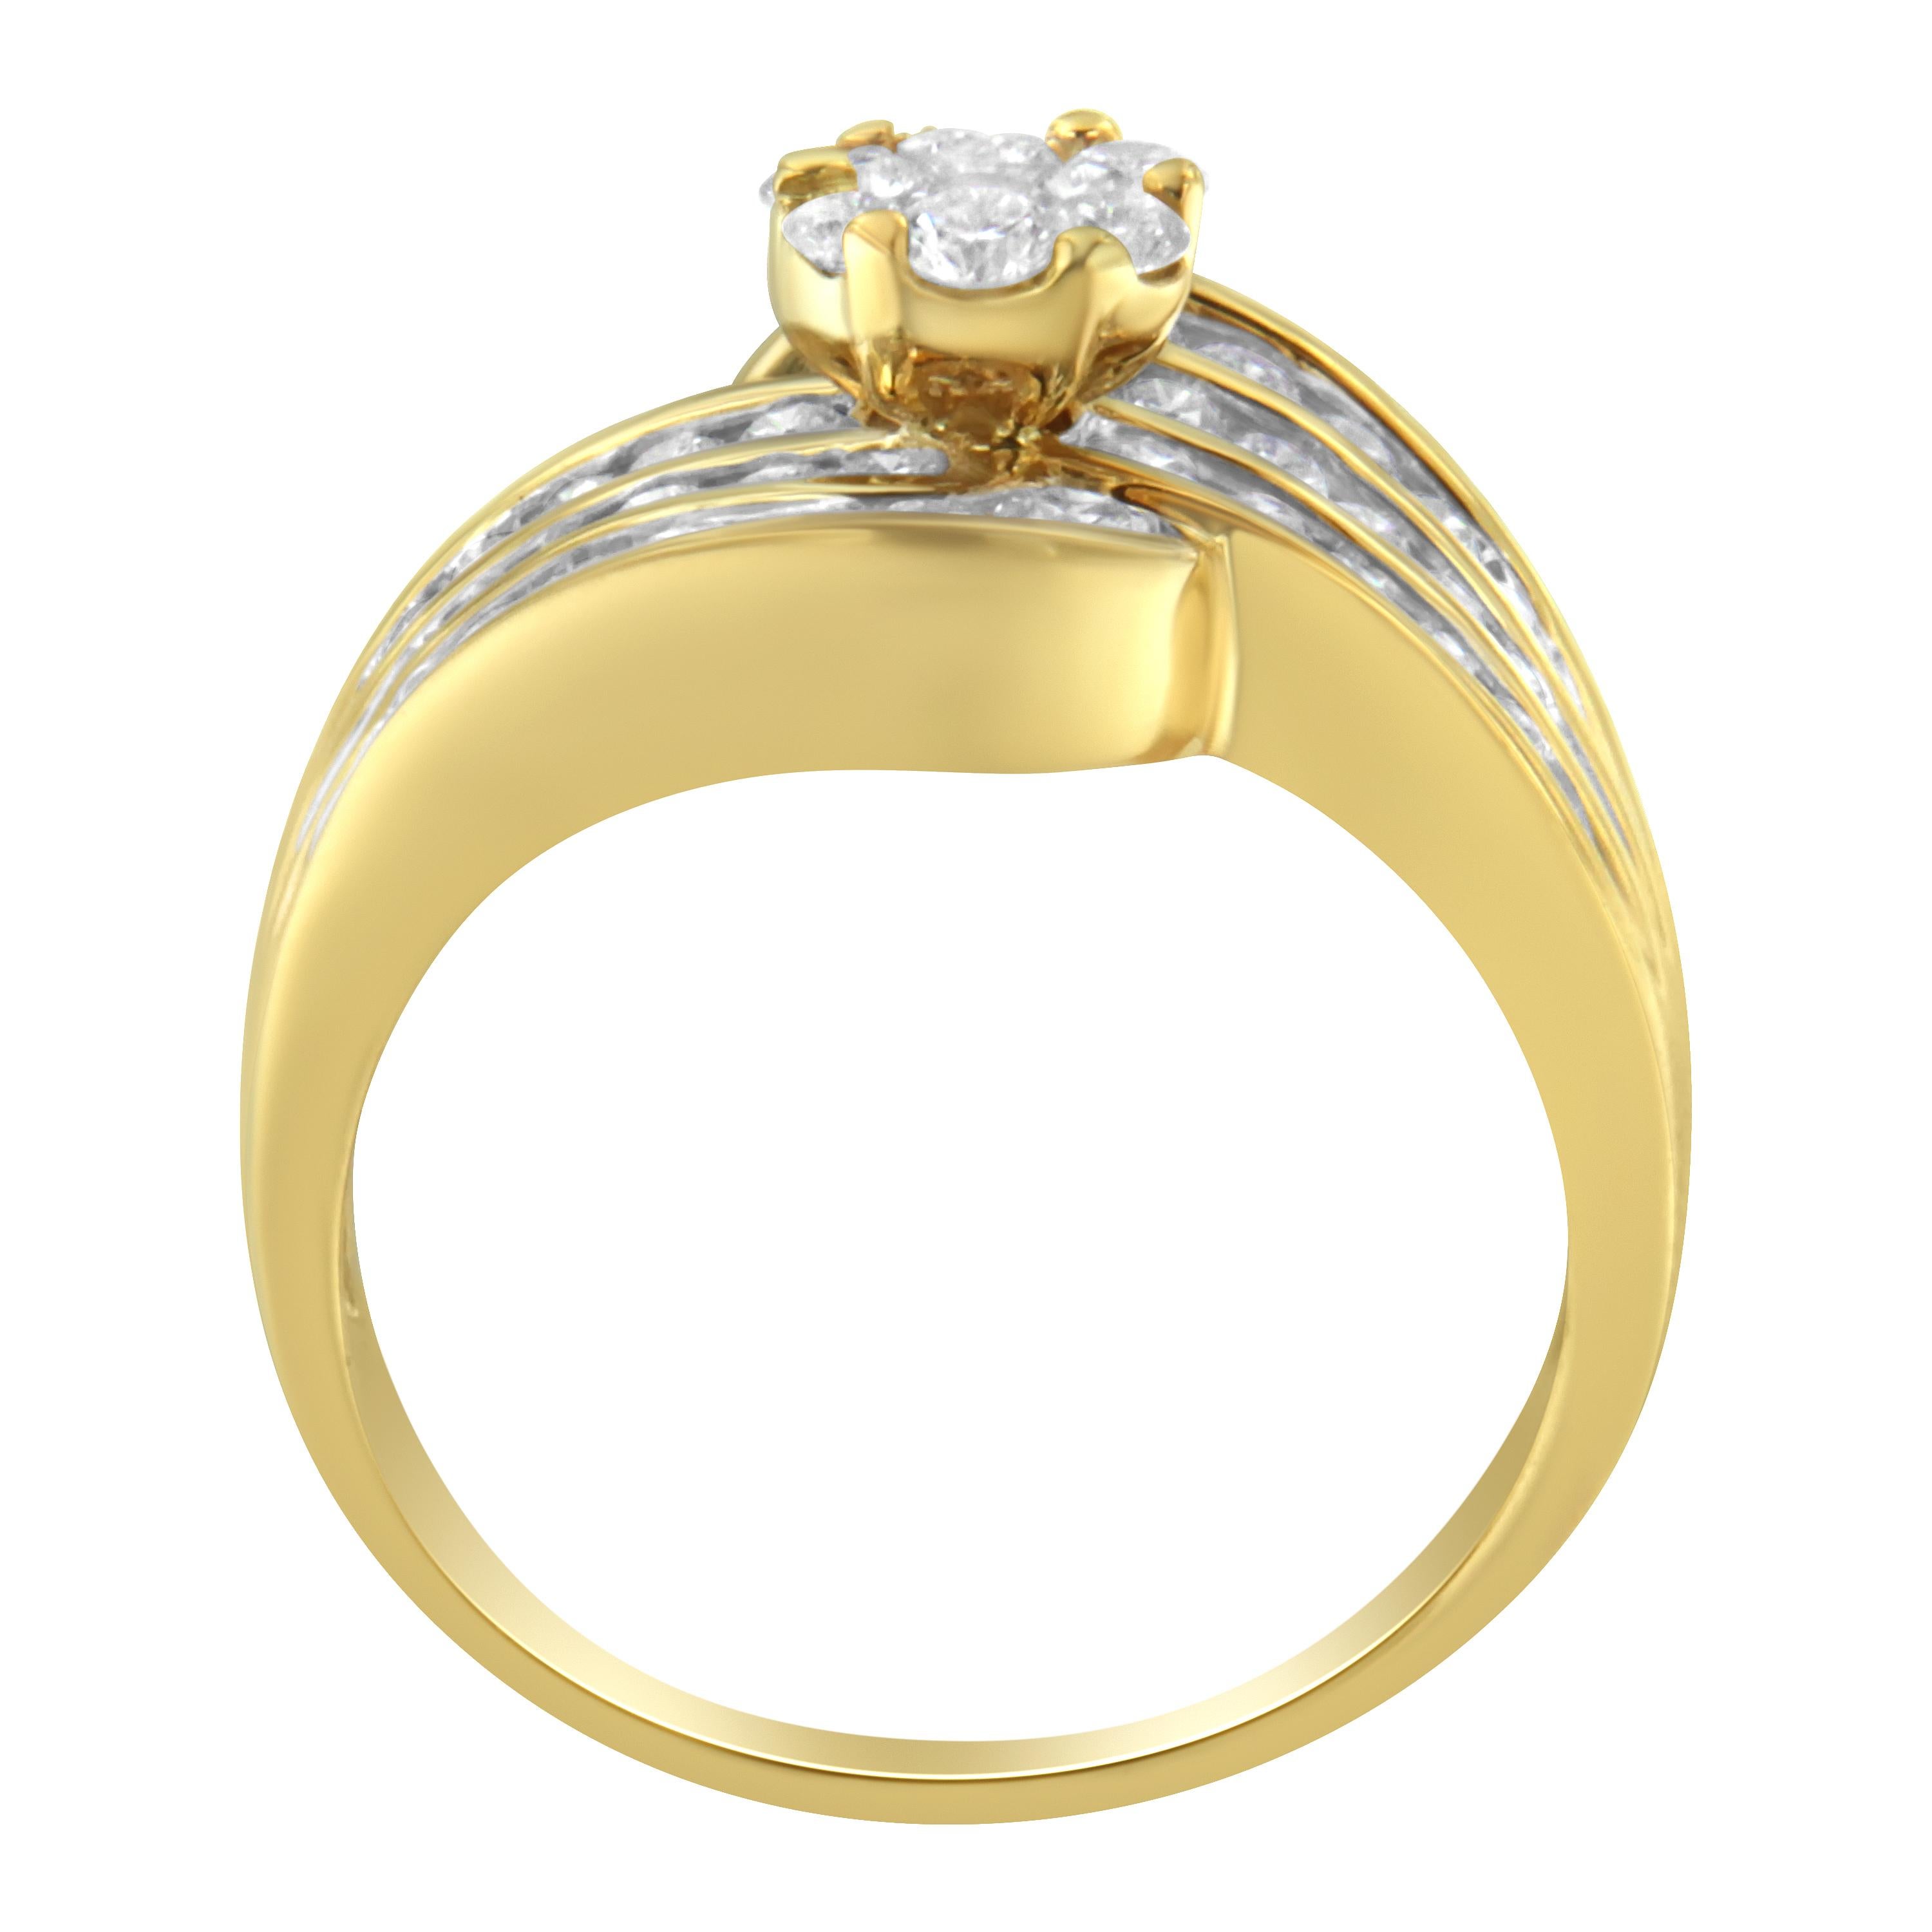 For Sale:  14K Yellow Gold 1 1/2 Carat Diamond Cocktail Bypass Ring 5